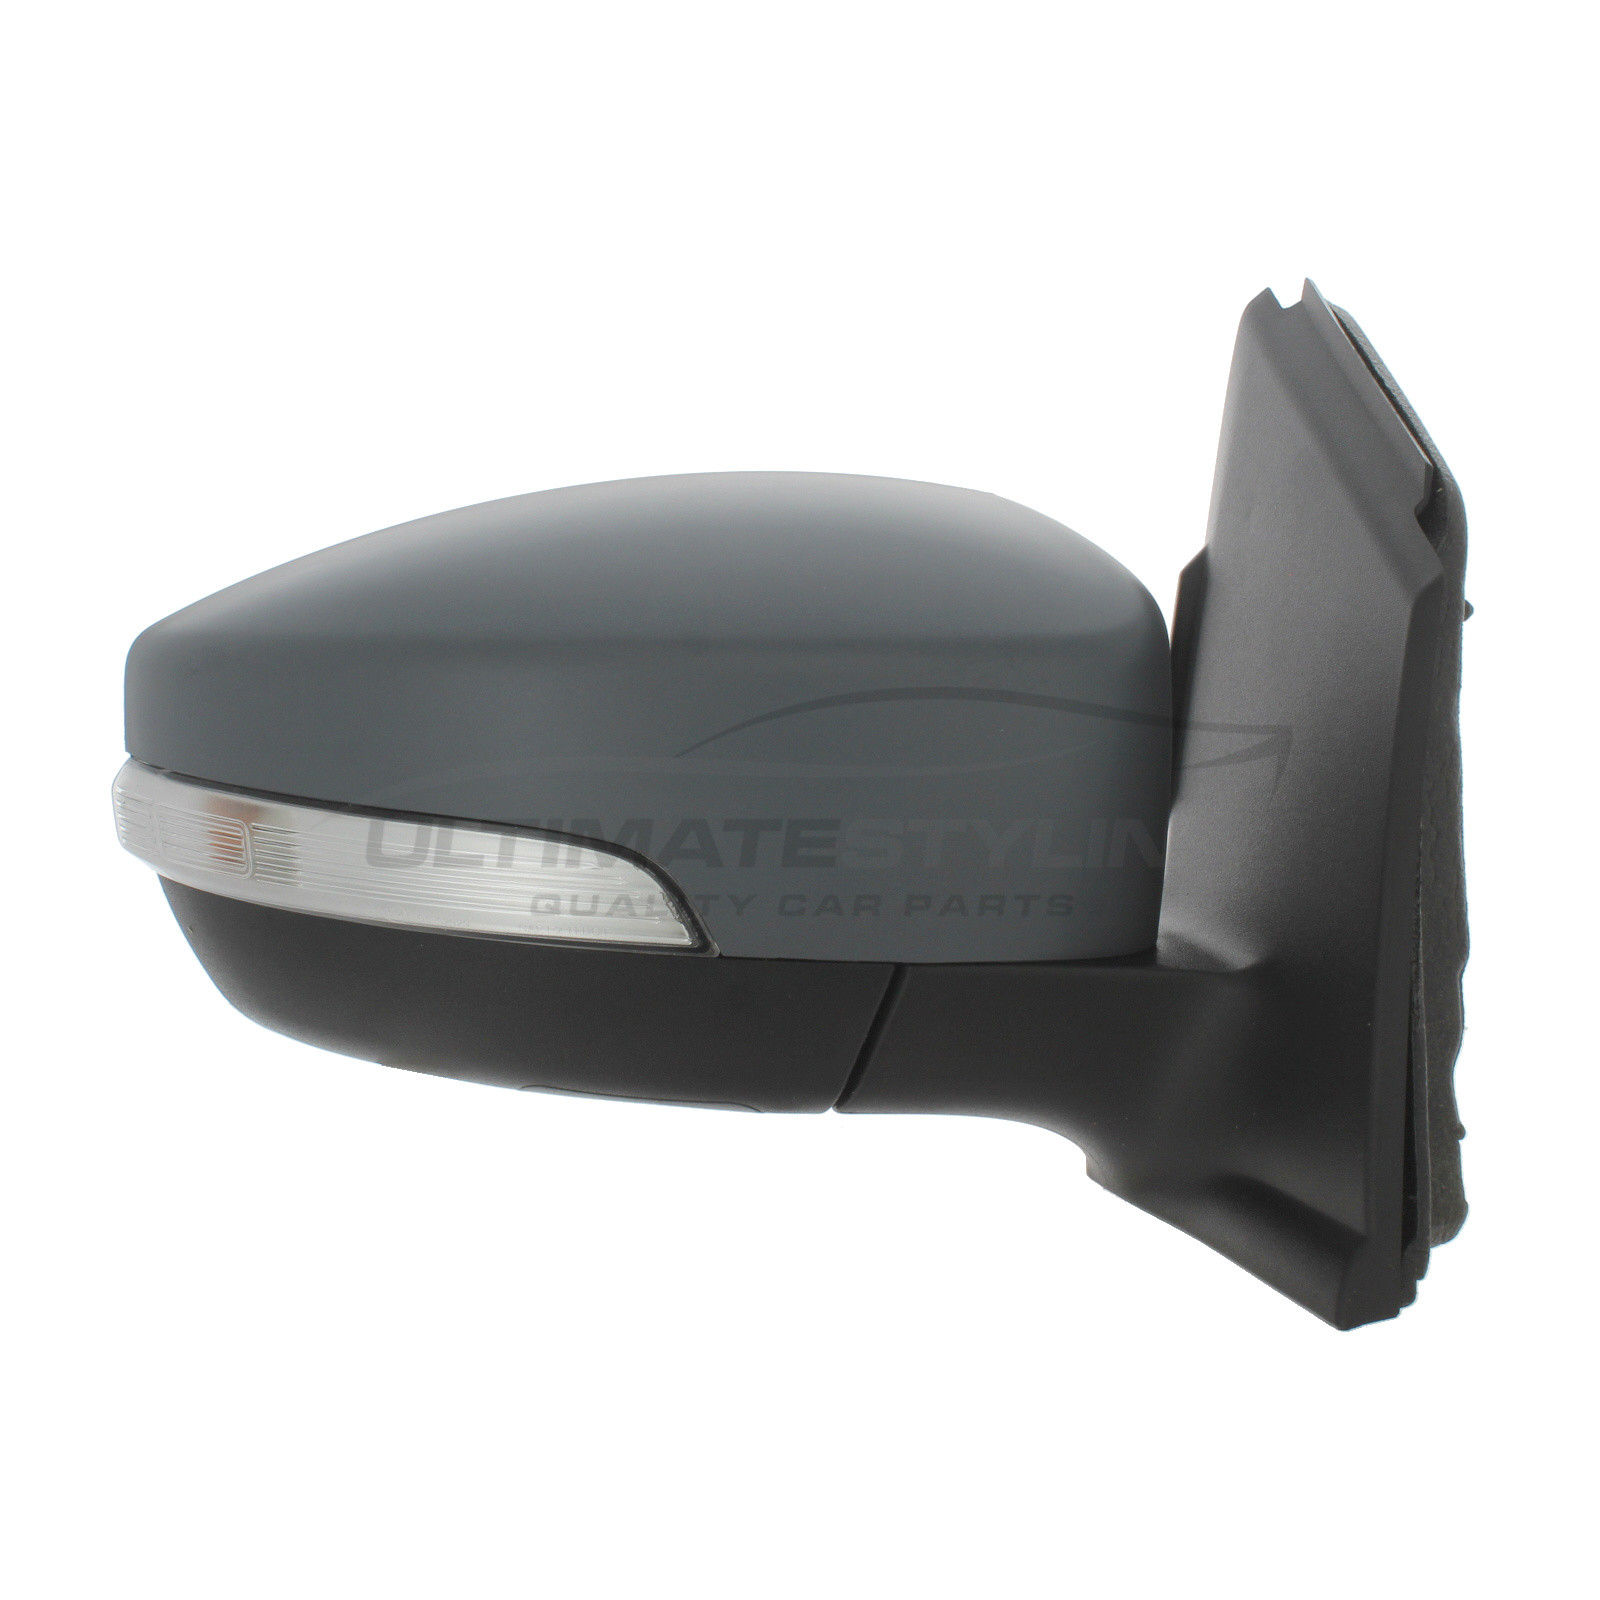 Ford Kuga Wing Mirror / Door Mirror - Drivers Side (RH) - Electric adjustment - Heated Glass - Indicator - Primed